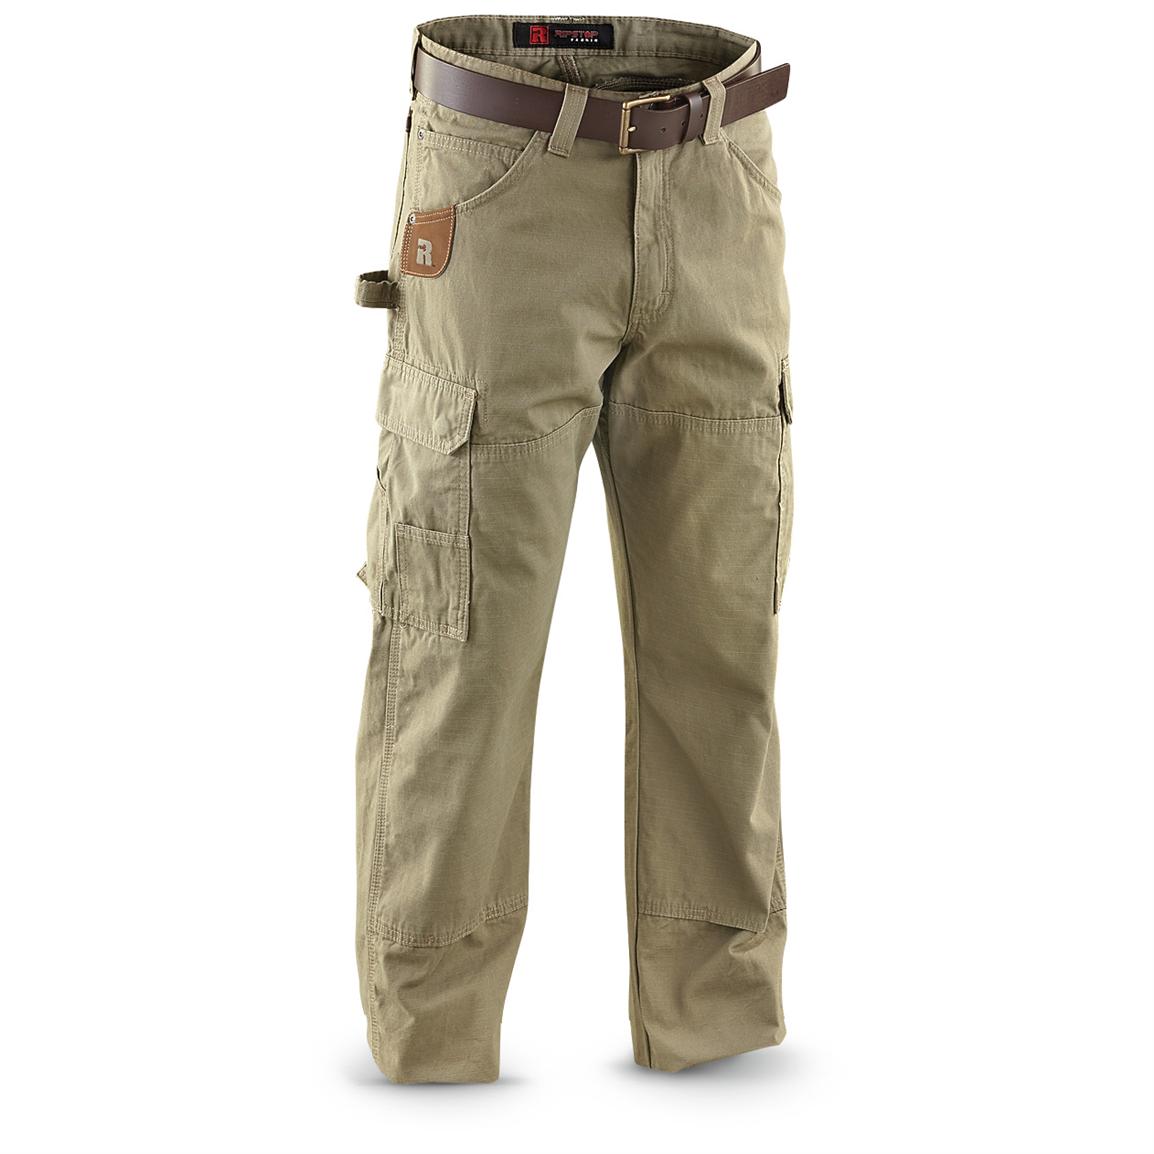 RIGGS WORKWEAR® by Wrangler® Ranger Cargo Pants - 221670, Jeans & Pants ...